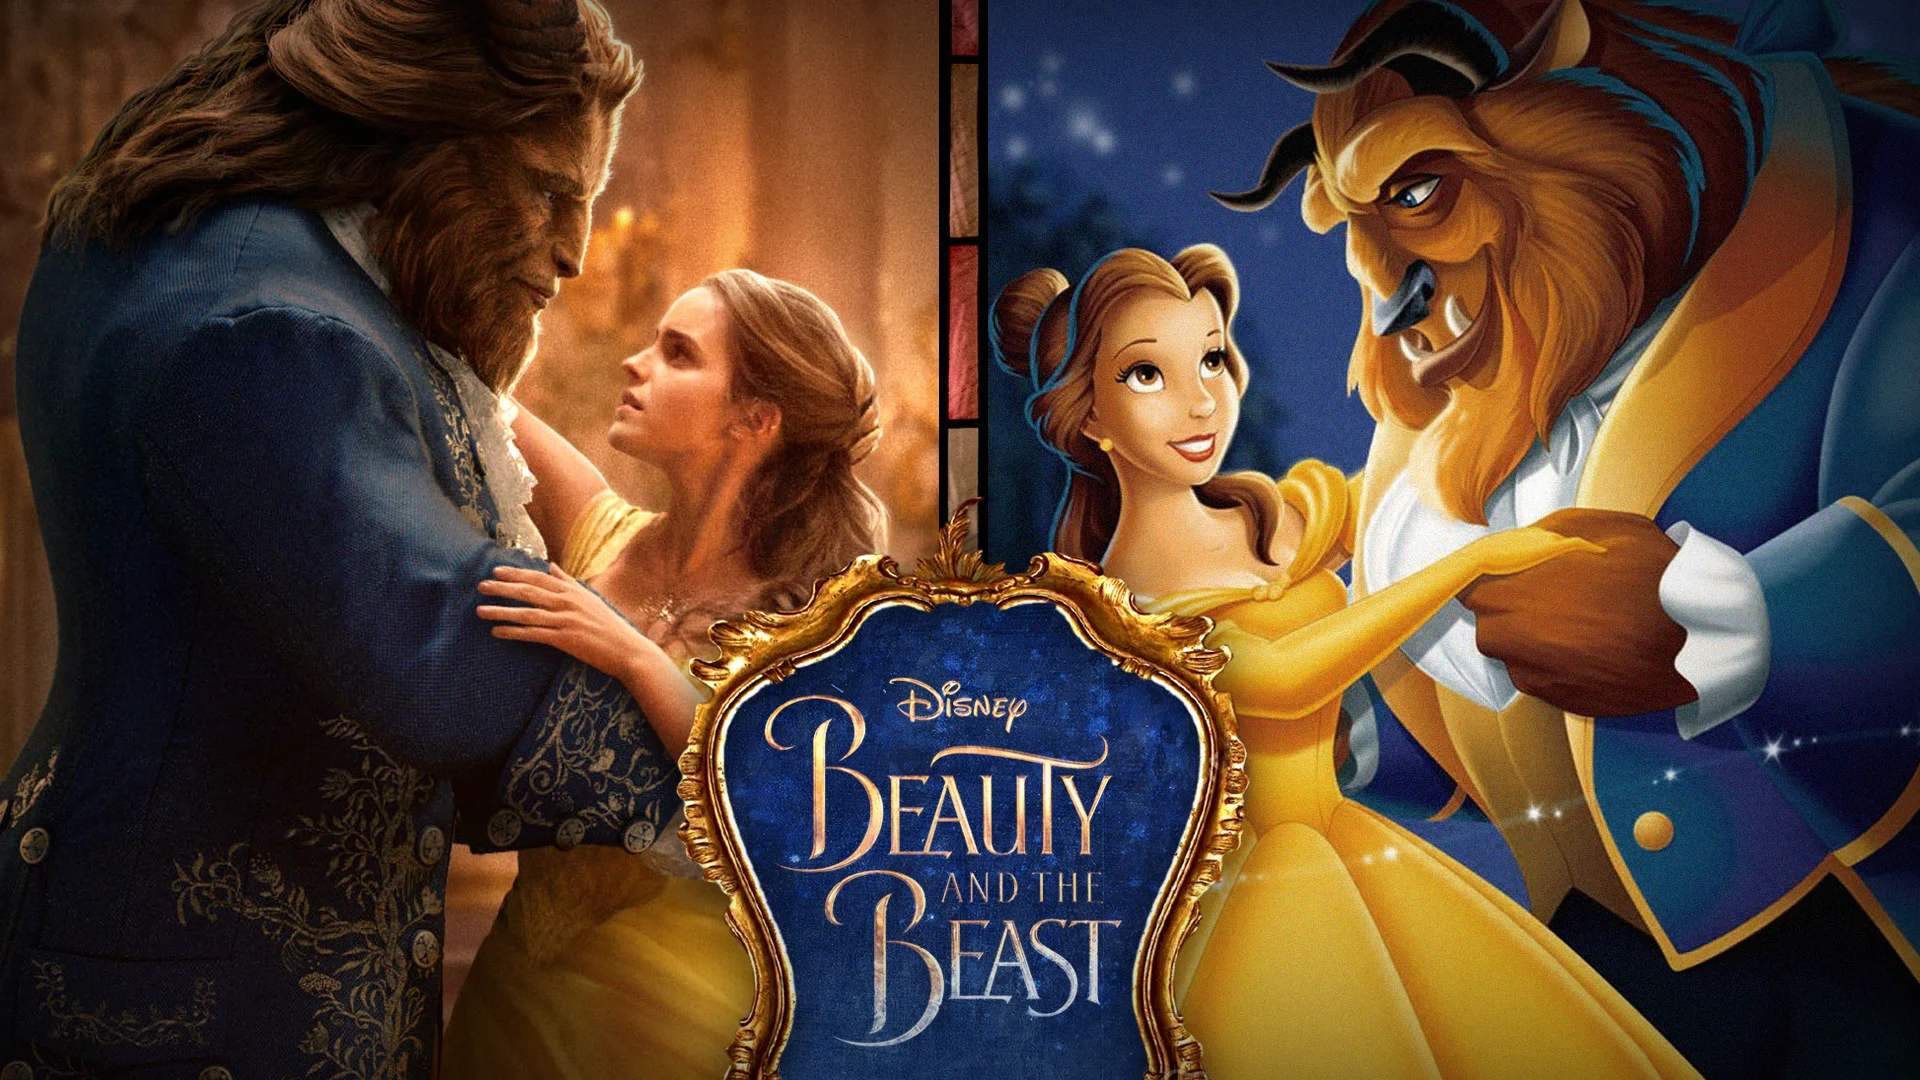 Beauty and the Beast': Differences Between Animated and Live